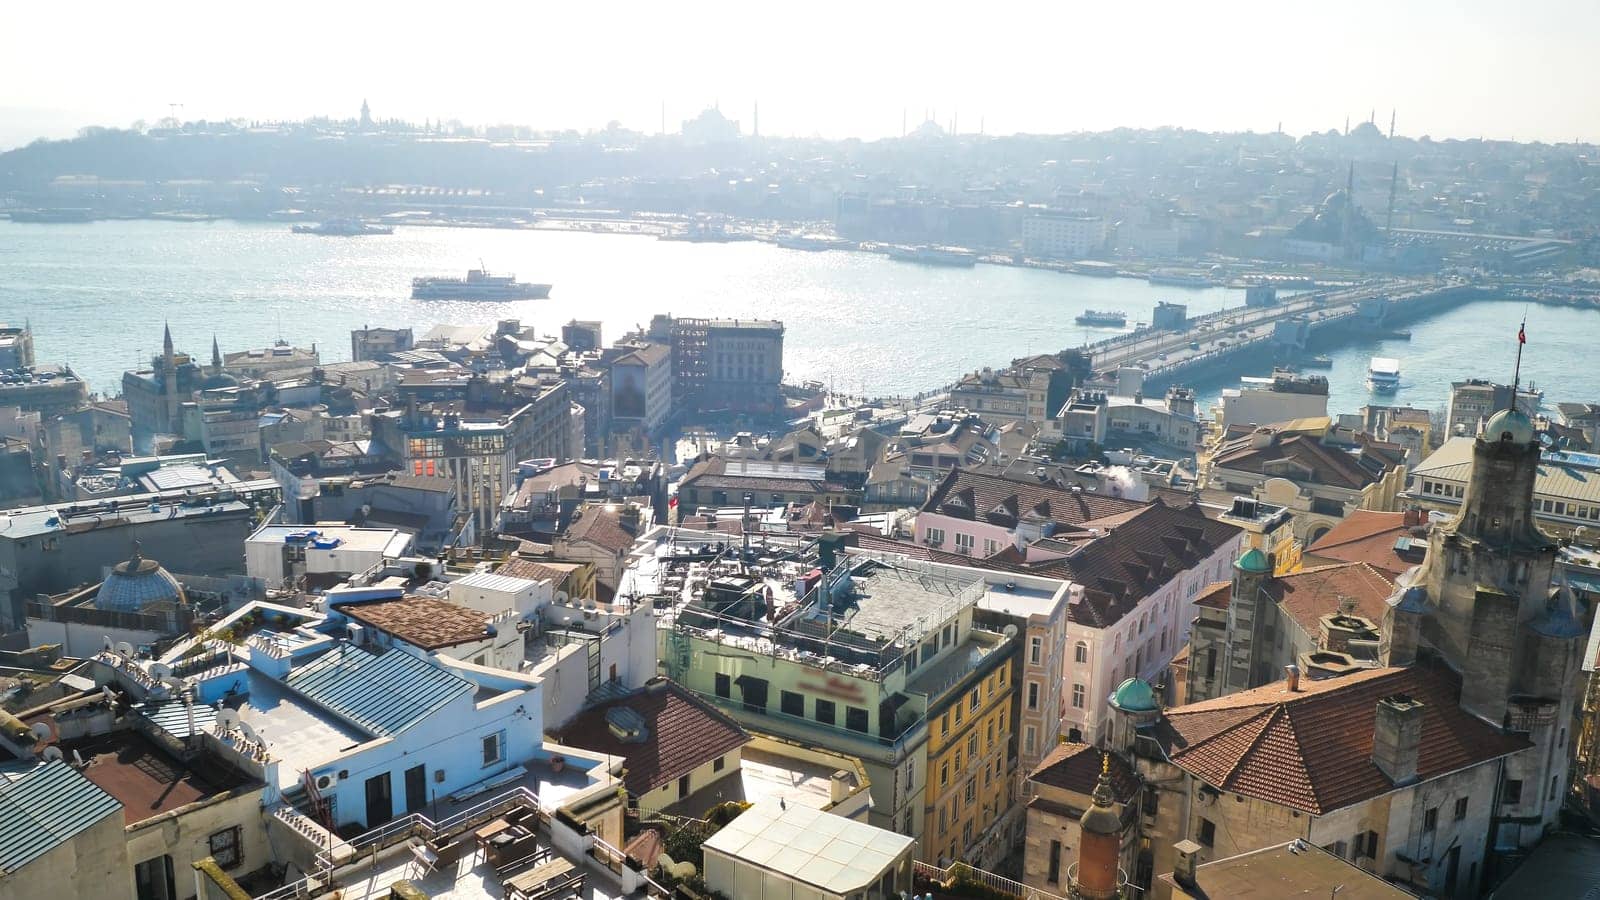 Panorama of the city of Istanbul from a height. by DovidPro